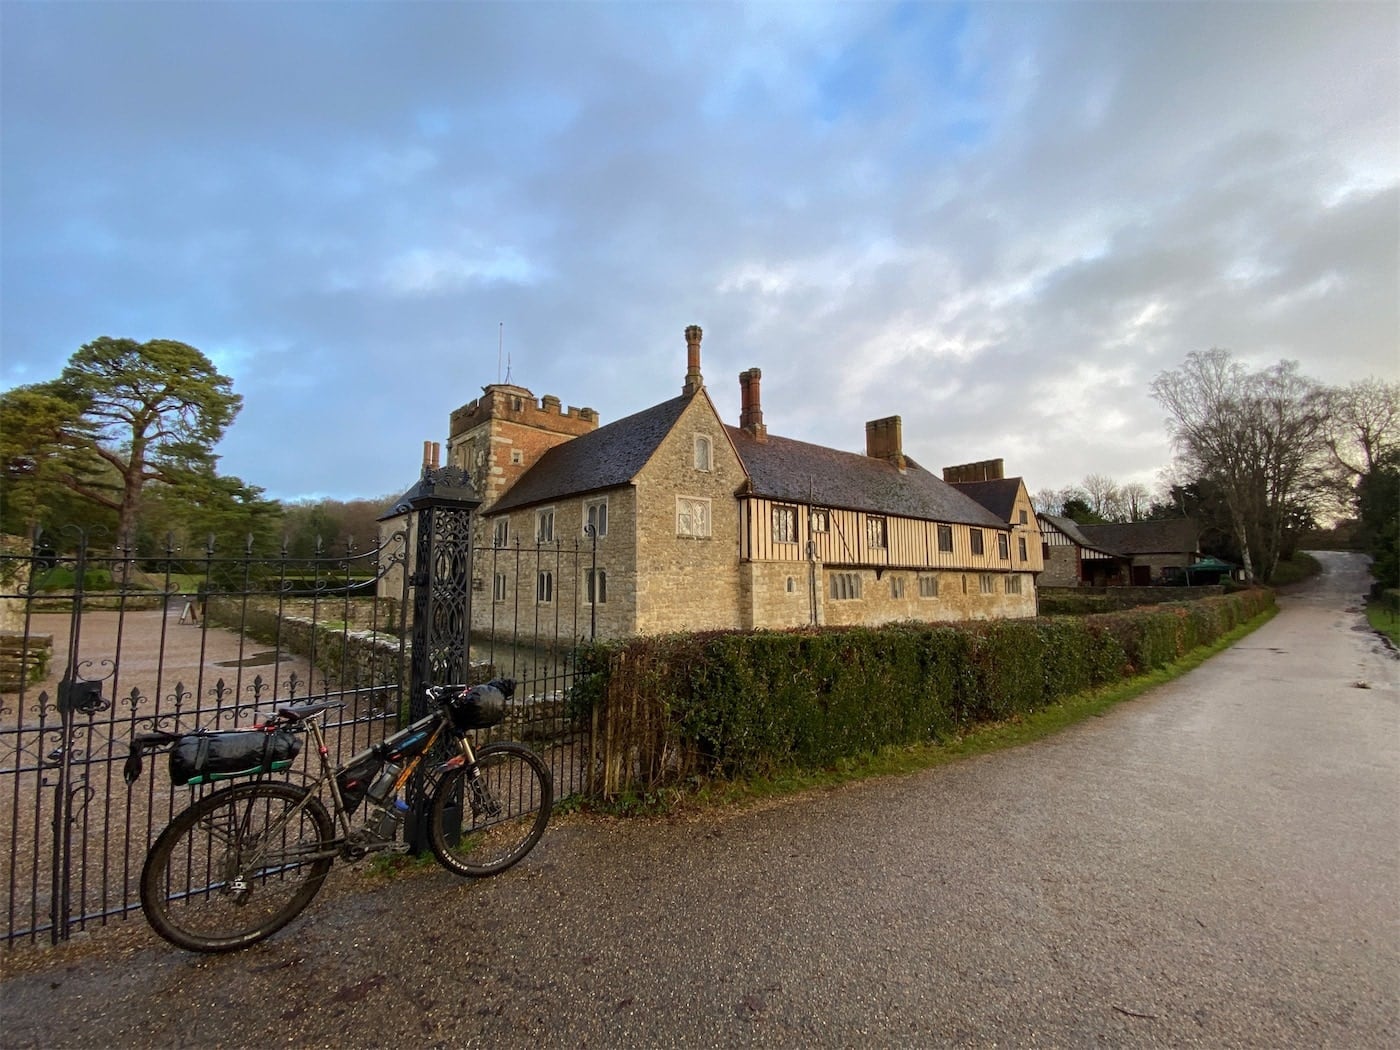 My route took me past Ightham Mote, a National Trust property. Which looked pretty nice in the morning light